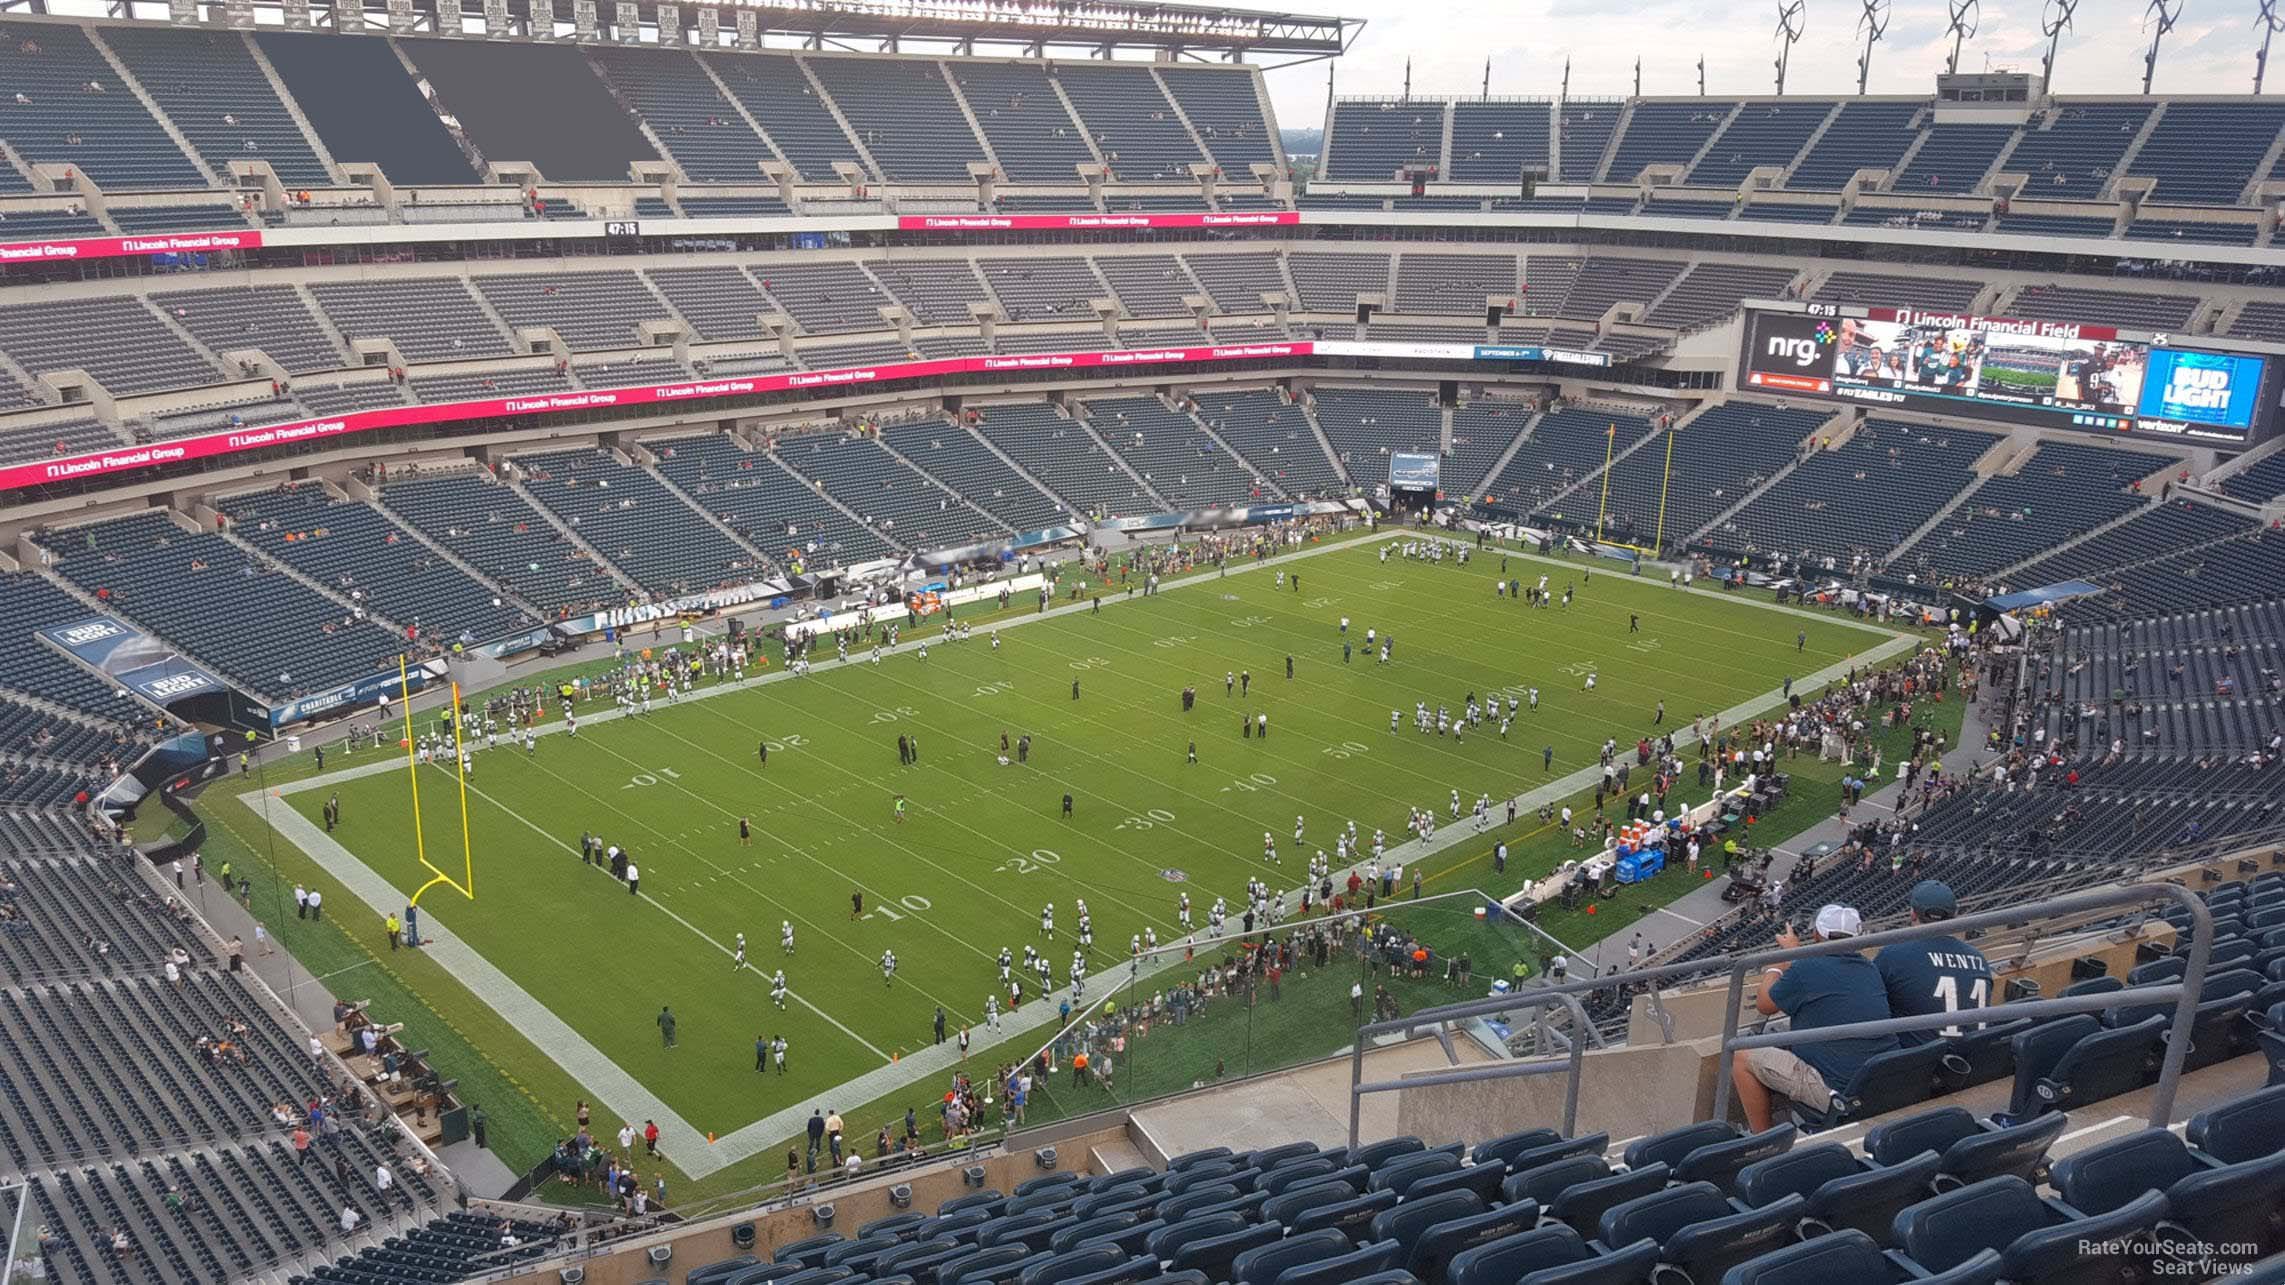 Section 239 at Lincoln Financial Field 